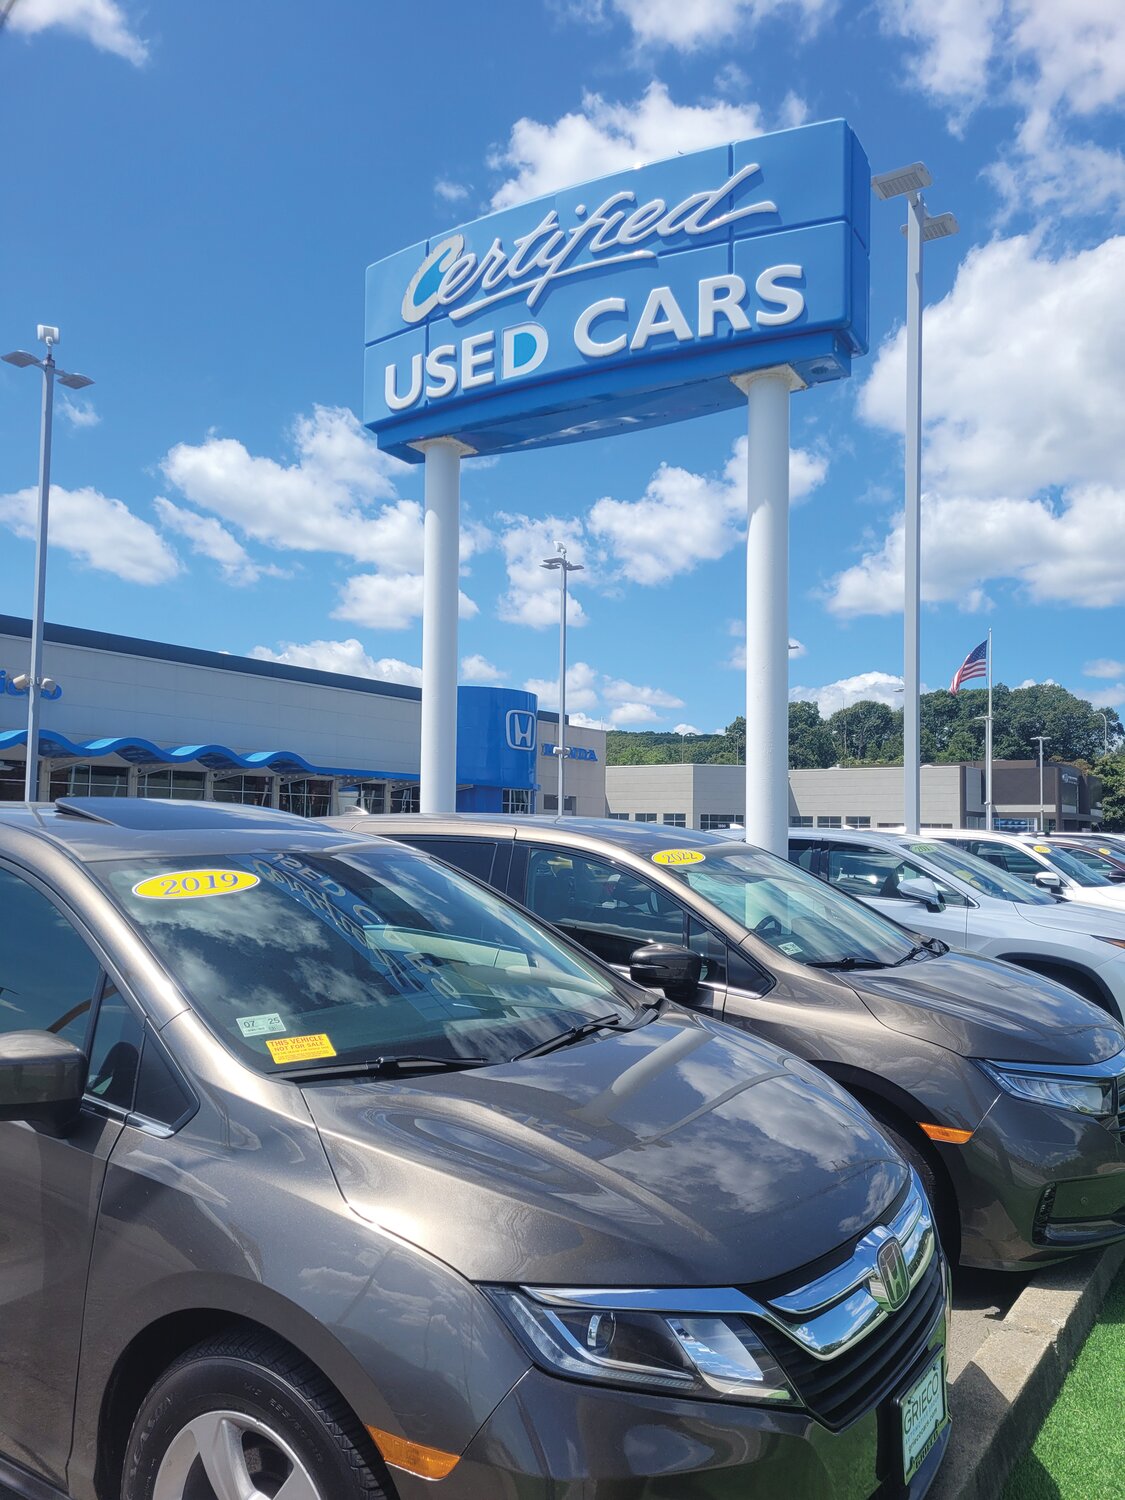 DTPA SETTLEMENT: Grieco Automotive Group says it has settled without admitting fault, following lawsuits by Rhode Island Attorney General Peter F. Neronha. The AG alleged Hartford Avenue dealerships “Grieco Honda, Grieco Toyota, and Grieco Hyundai engaged in sales and pricing tactics that violated the Deceptive Trade Practices Act (DTPA).”